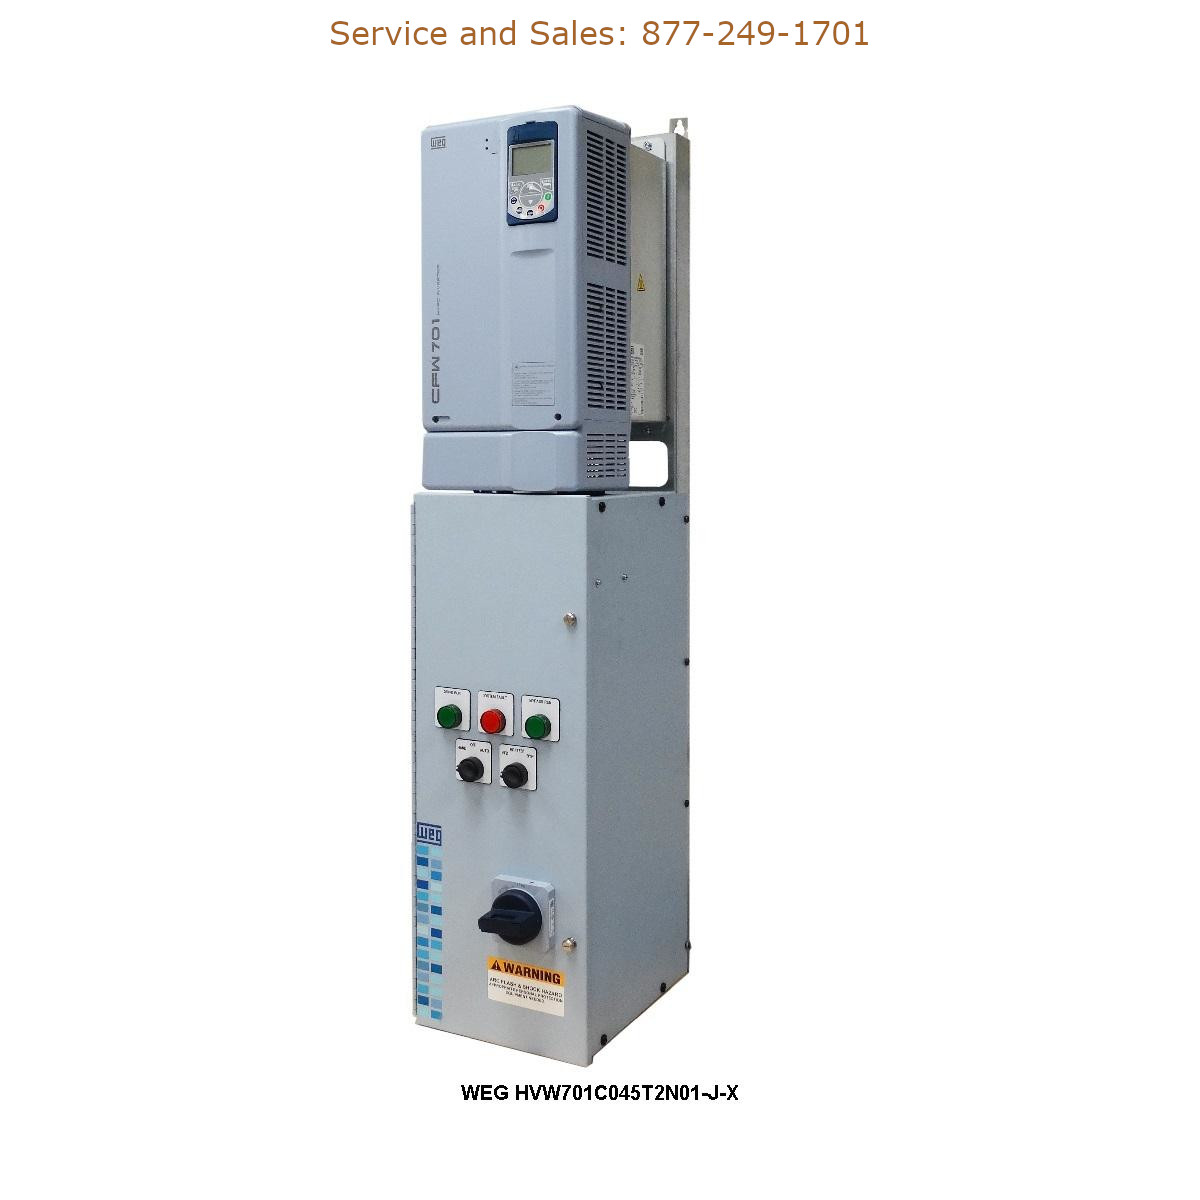 WEG HVW701C045T2N01-J-X WEG Model Number HVW701C045T2N01-J-X WEG Drives, Variable Speed Drives Repair Service, Troubleshooting, Replacement Parts https://gesrepair.com/wp-content/uploads/2022/WEG/WEG_HVW701C045T2N01-J-X_Drives_Variable_Speed_Drives.jpg